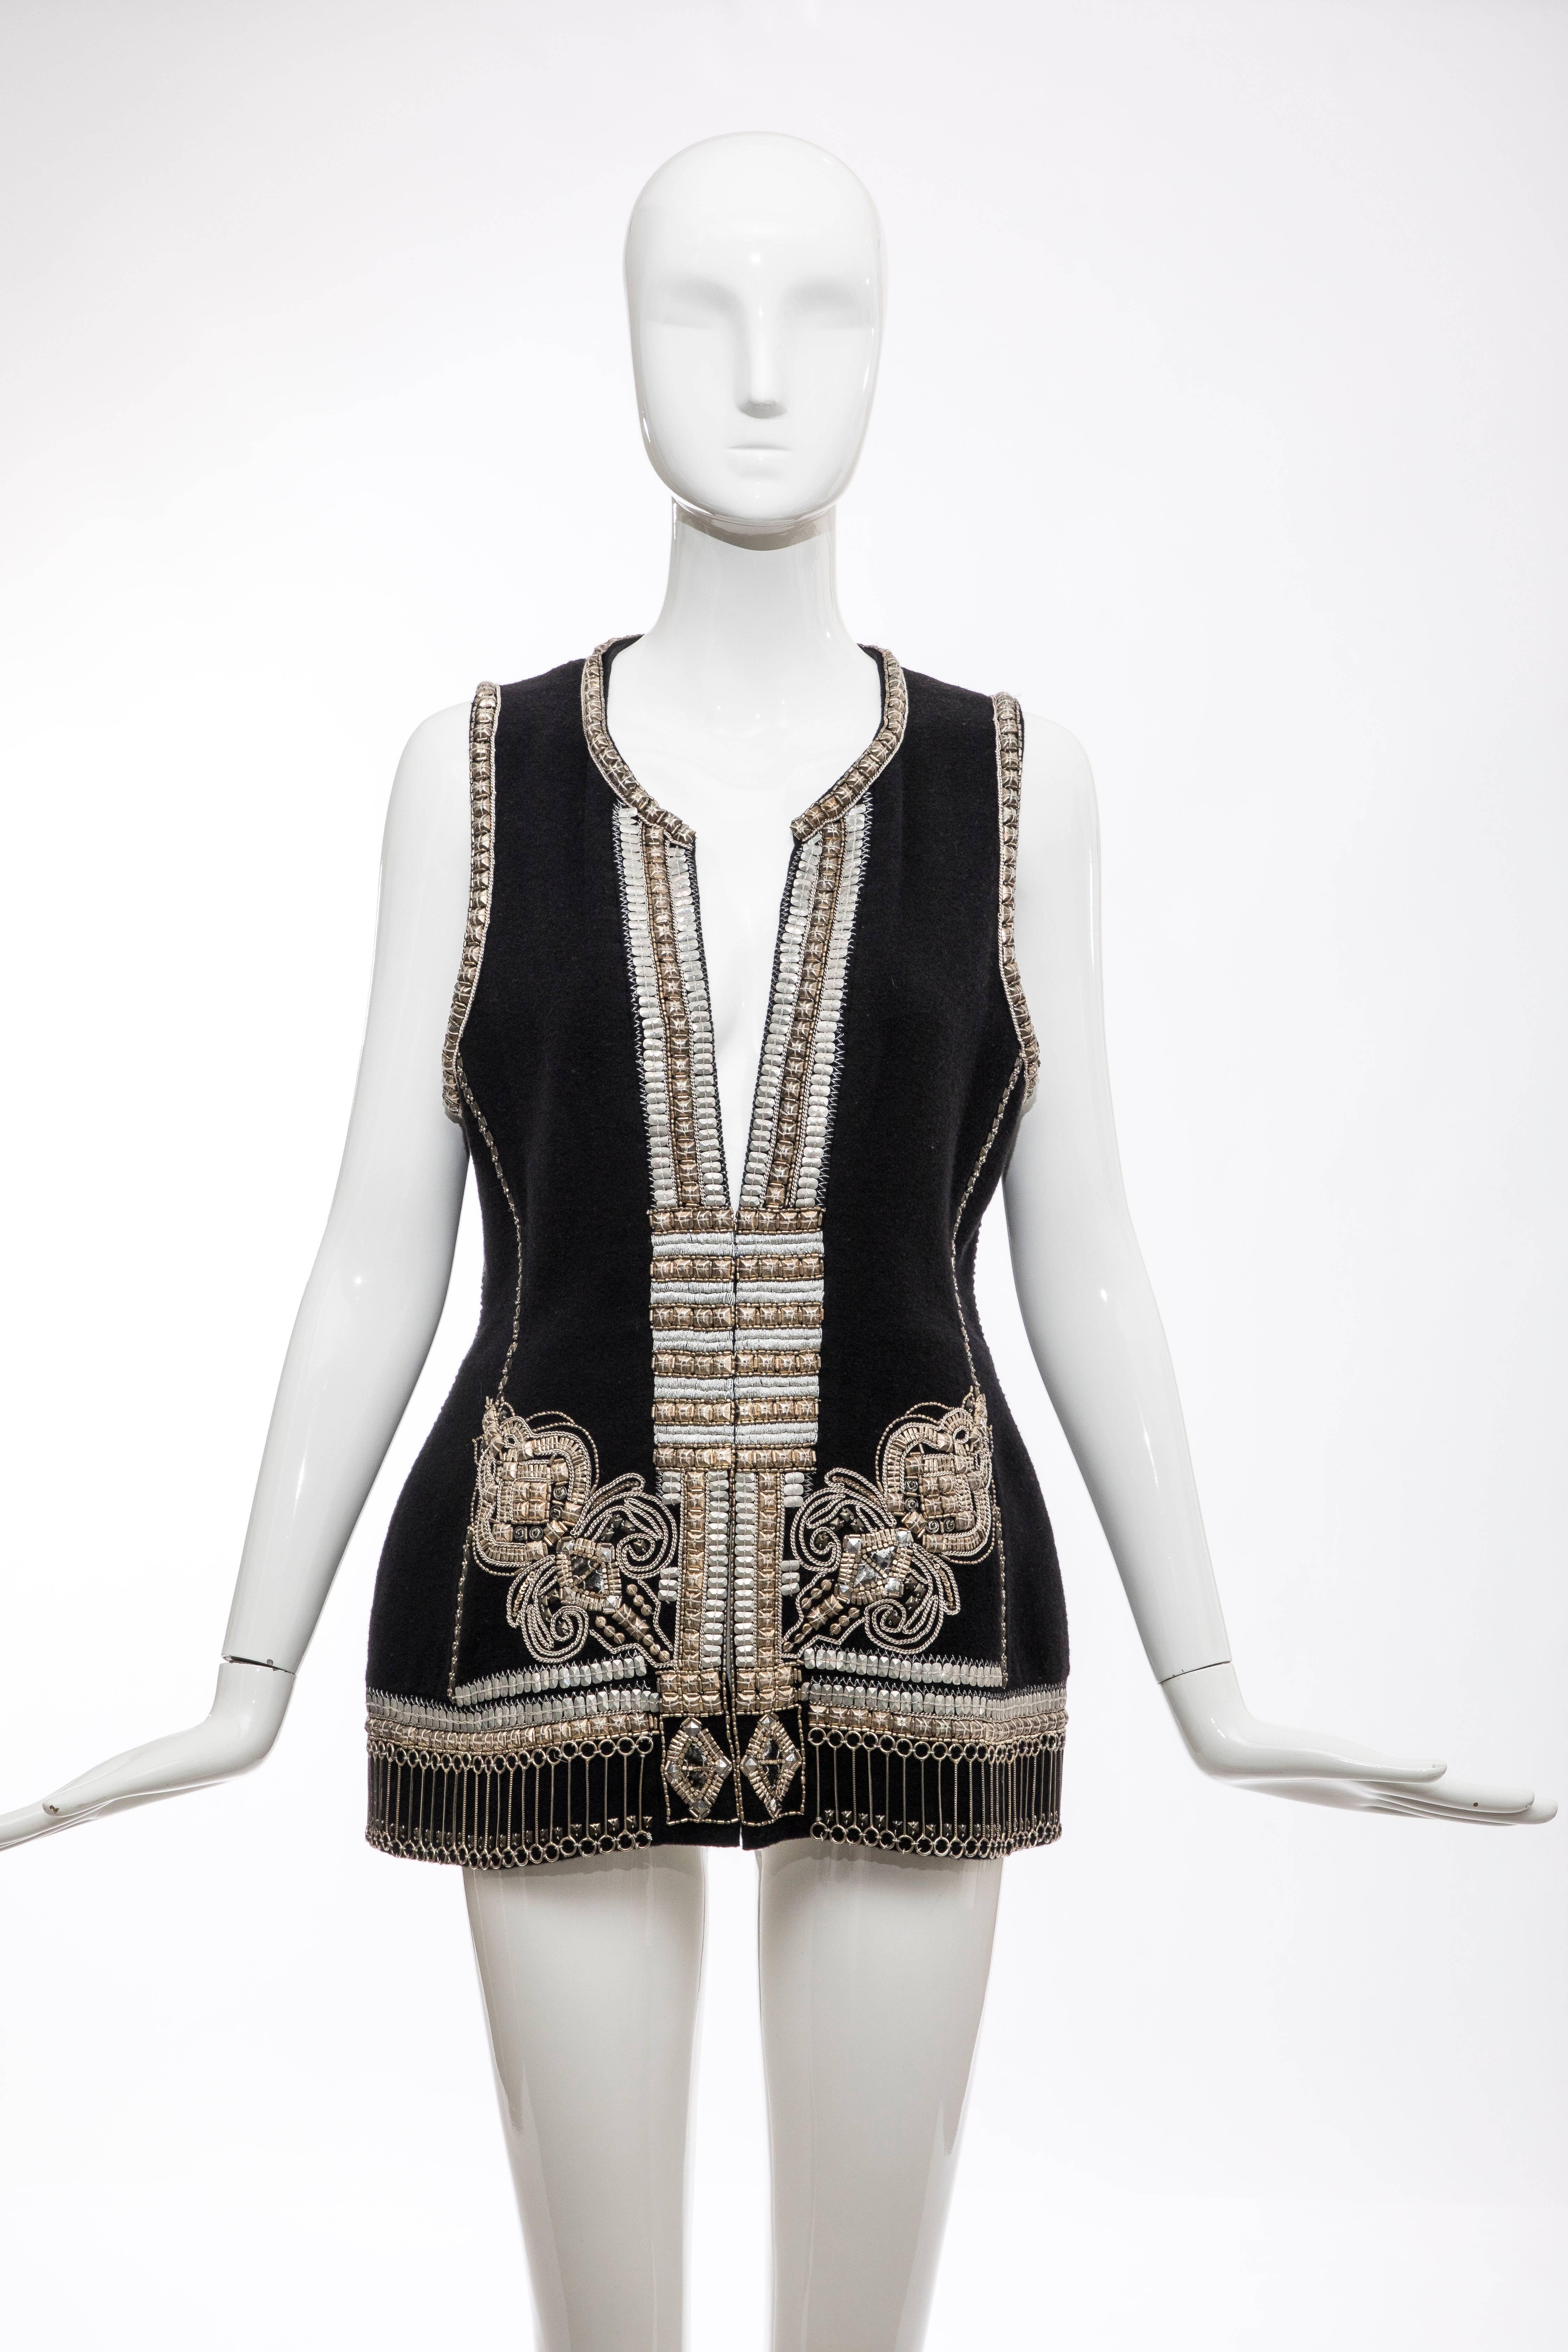 Dries Van Noten, Autumn-Winter 2010 runway black wool cashmere embroidered vest with silver Indian thread and hook-and-eye closure.

FR. 38
US. 6

Bust: 36, Waist 34, Length 26
